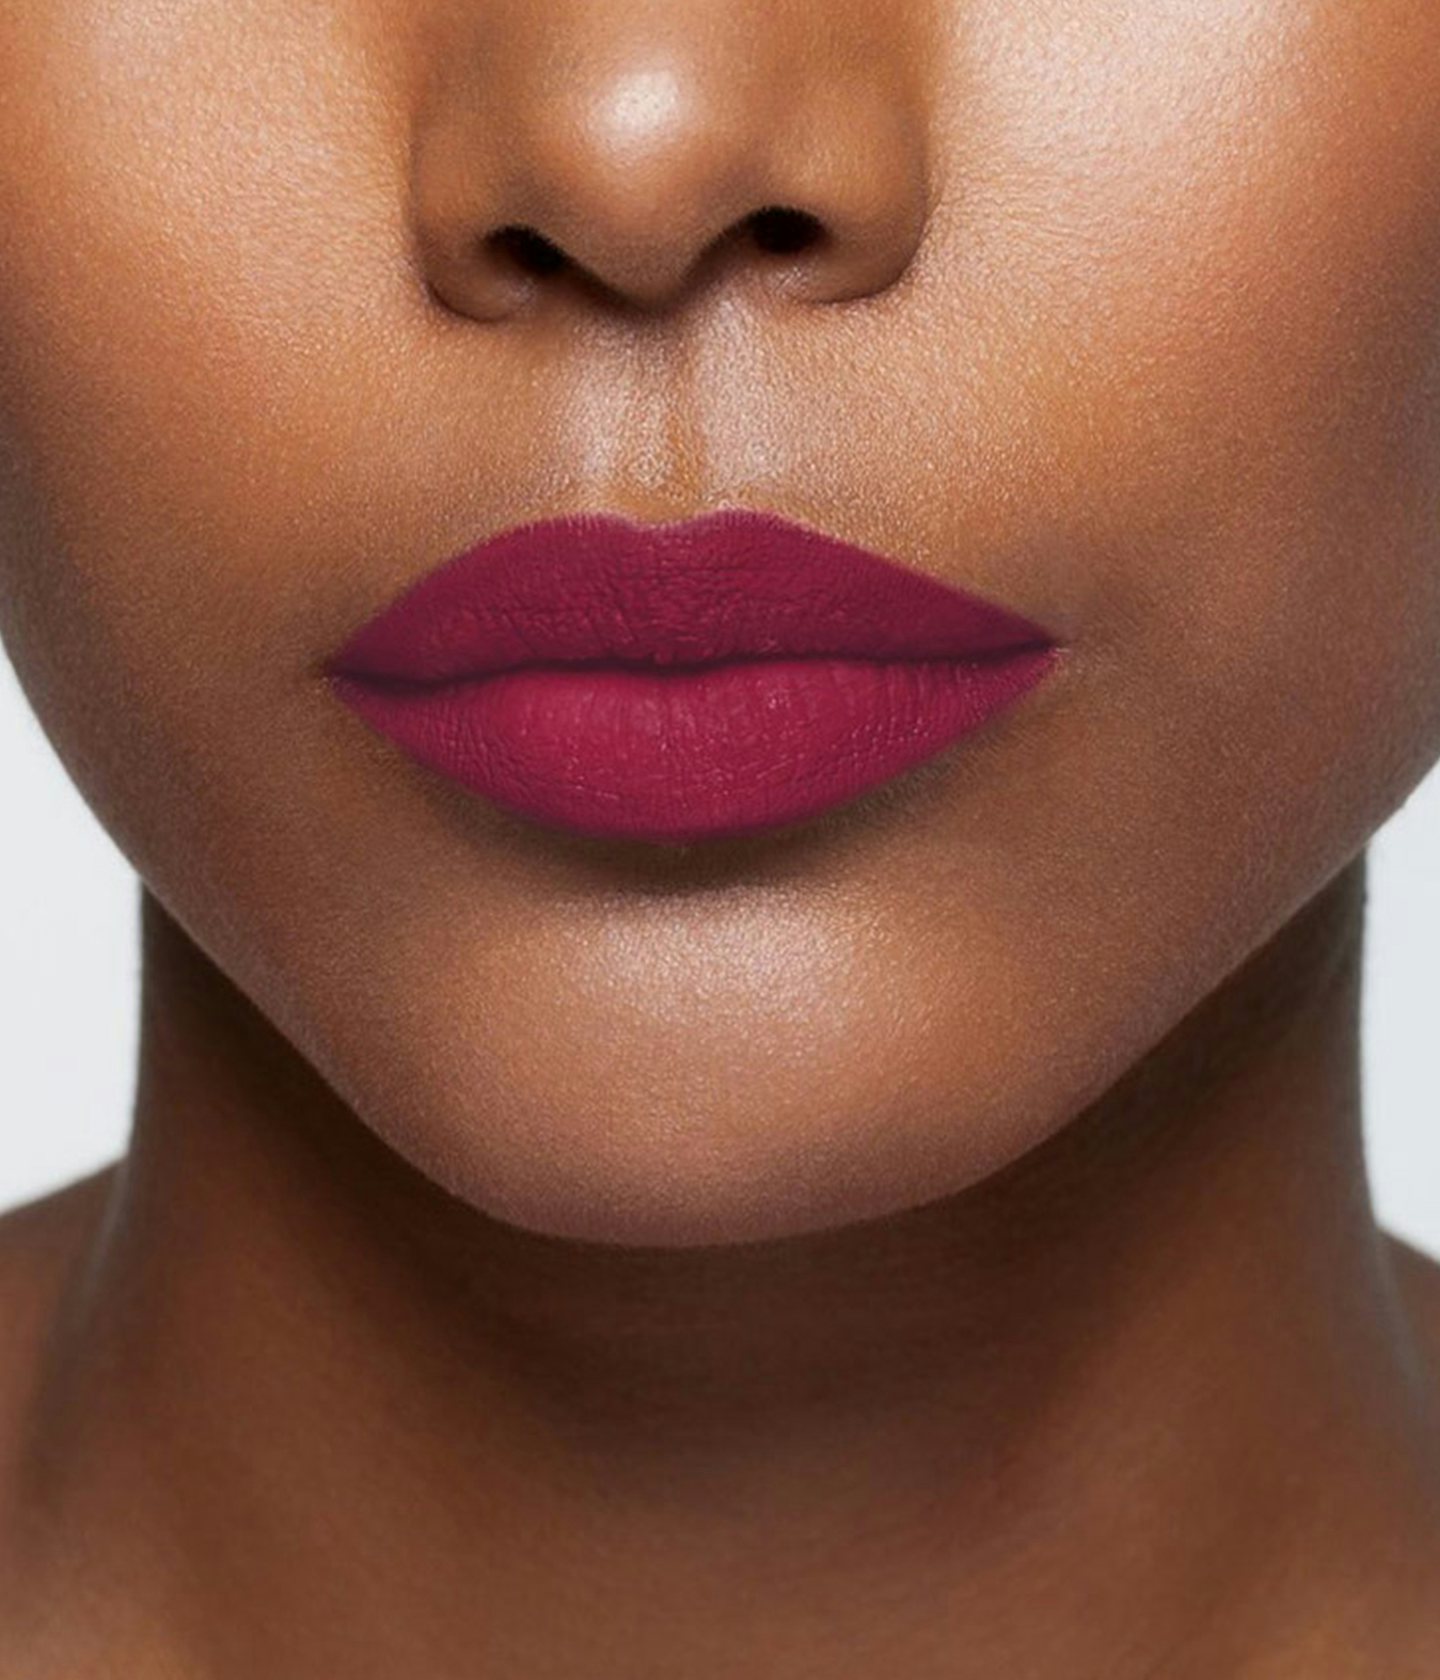  La bouche rouge Passionate Red lipstick shade on the lips of a dark skin model